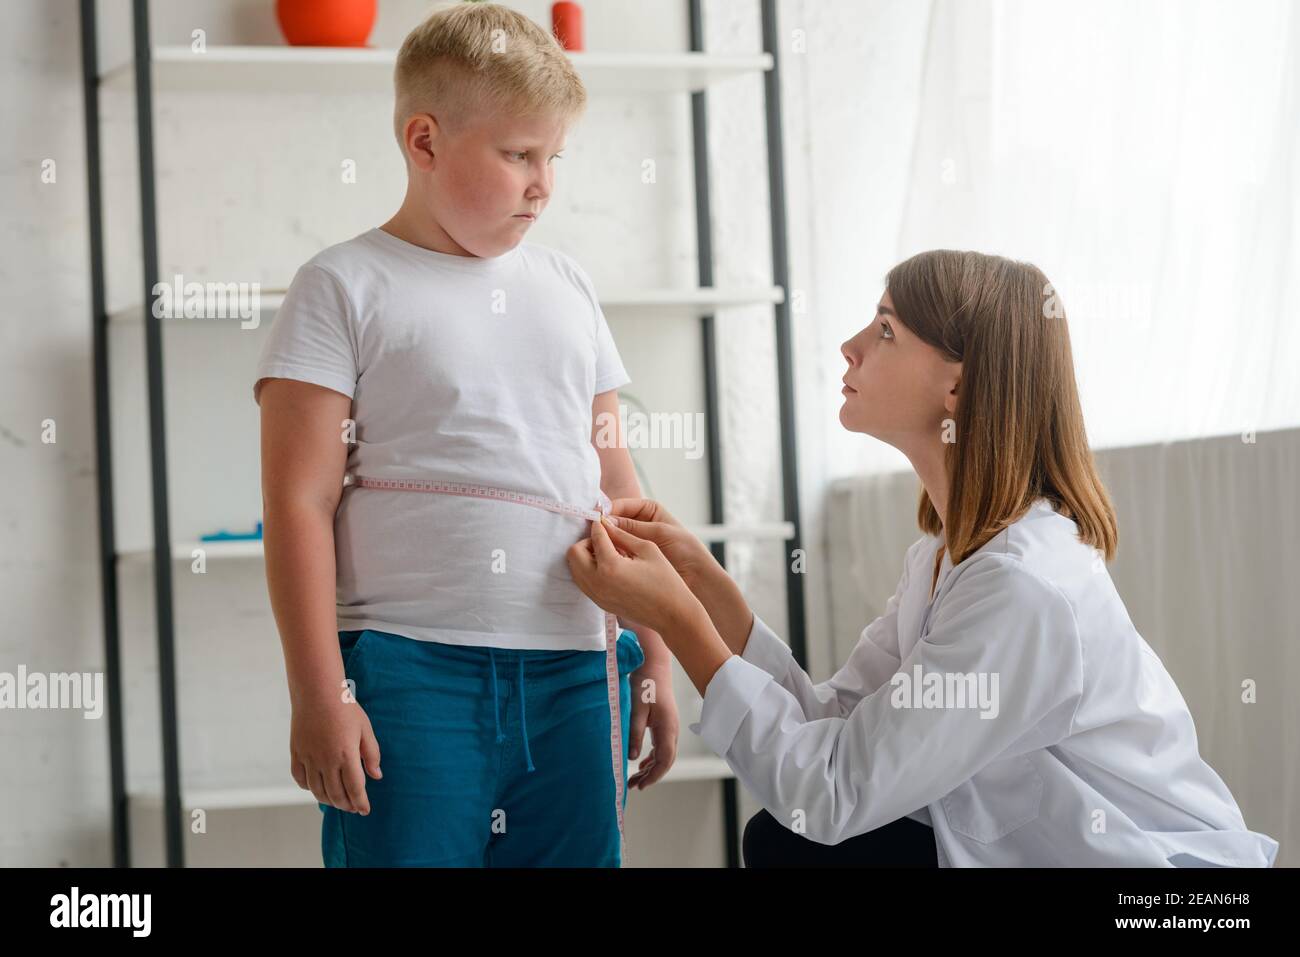 Little chubby boy being measured by a friendly doctor Stock Photo